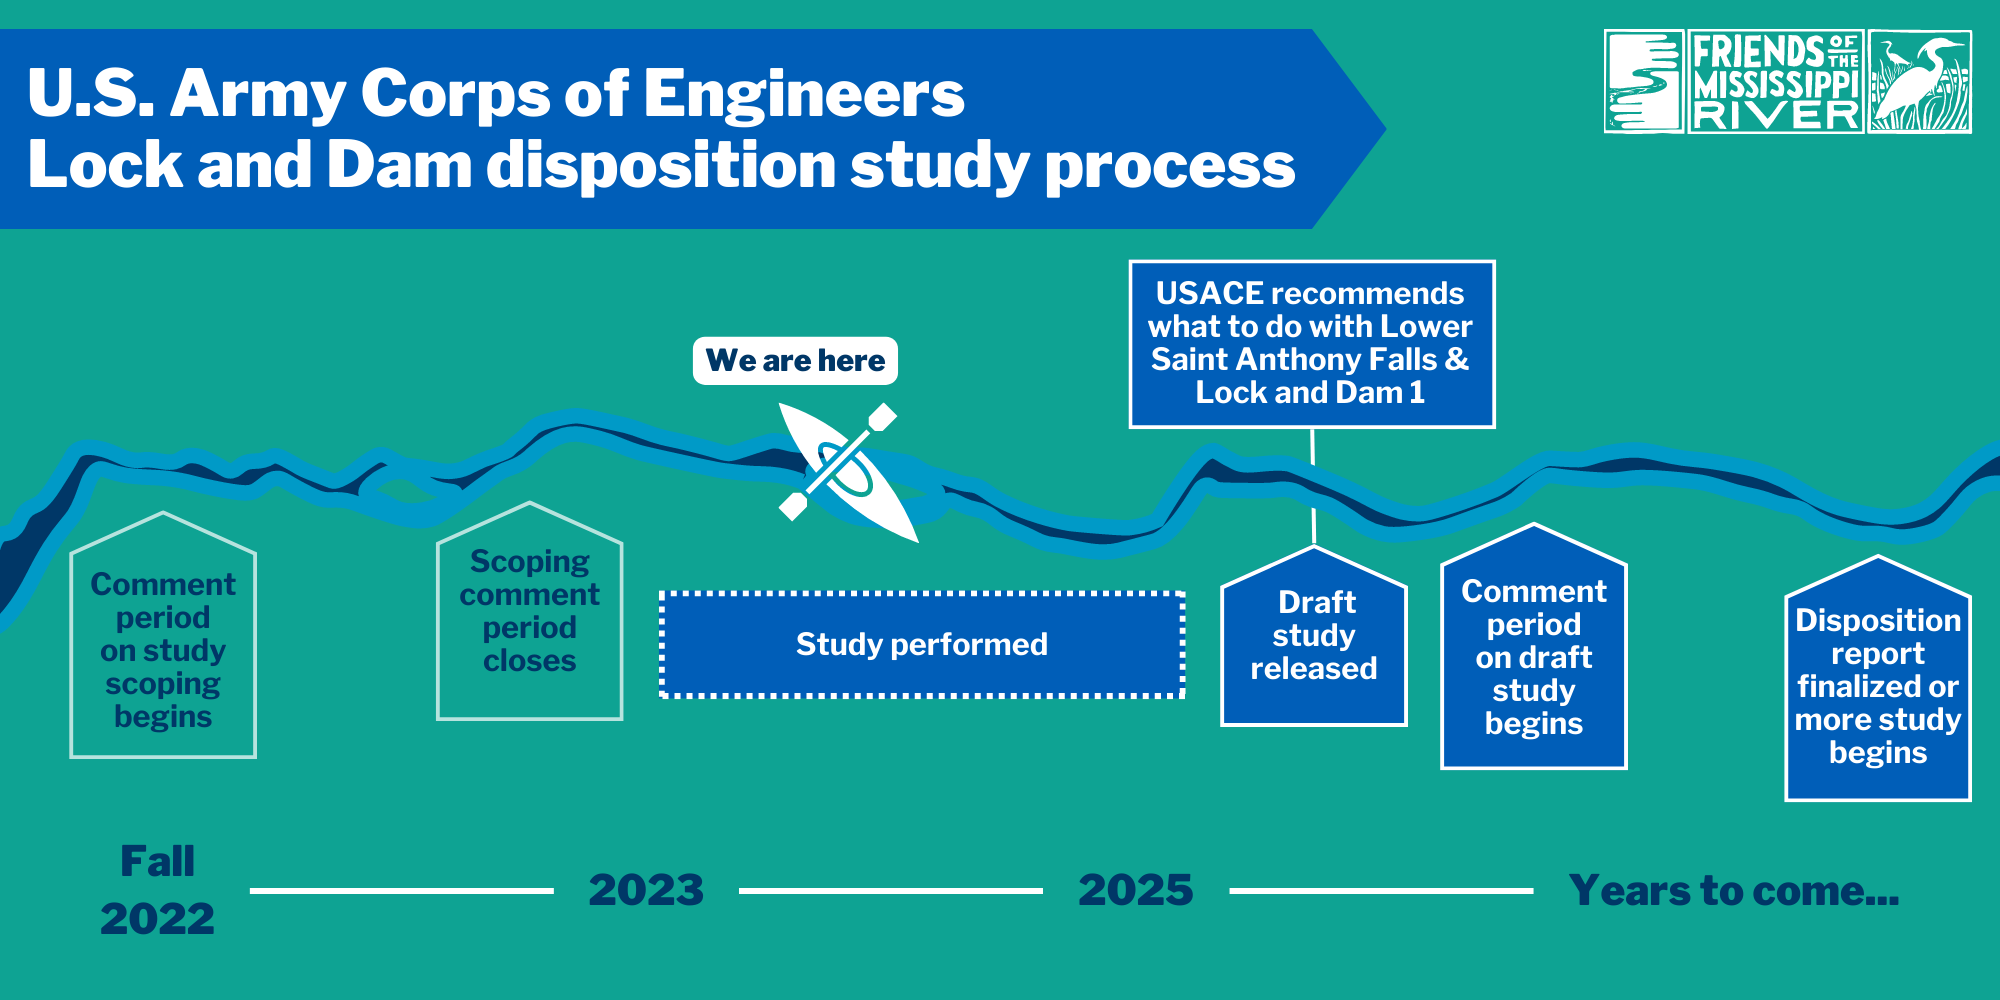 Disposition study timeline: scope has been released and study is starting